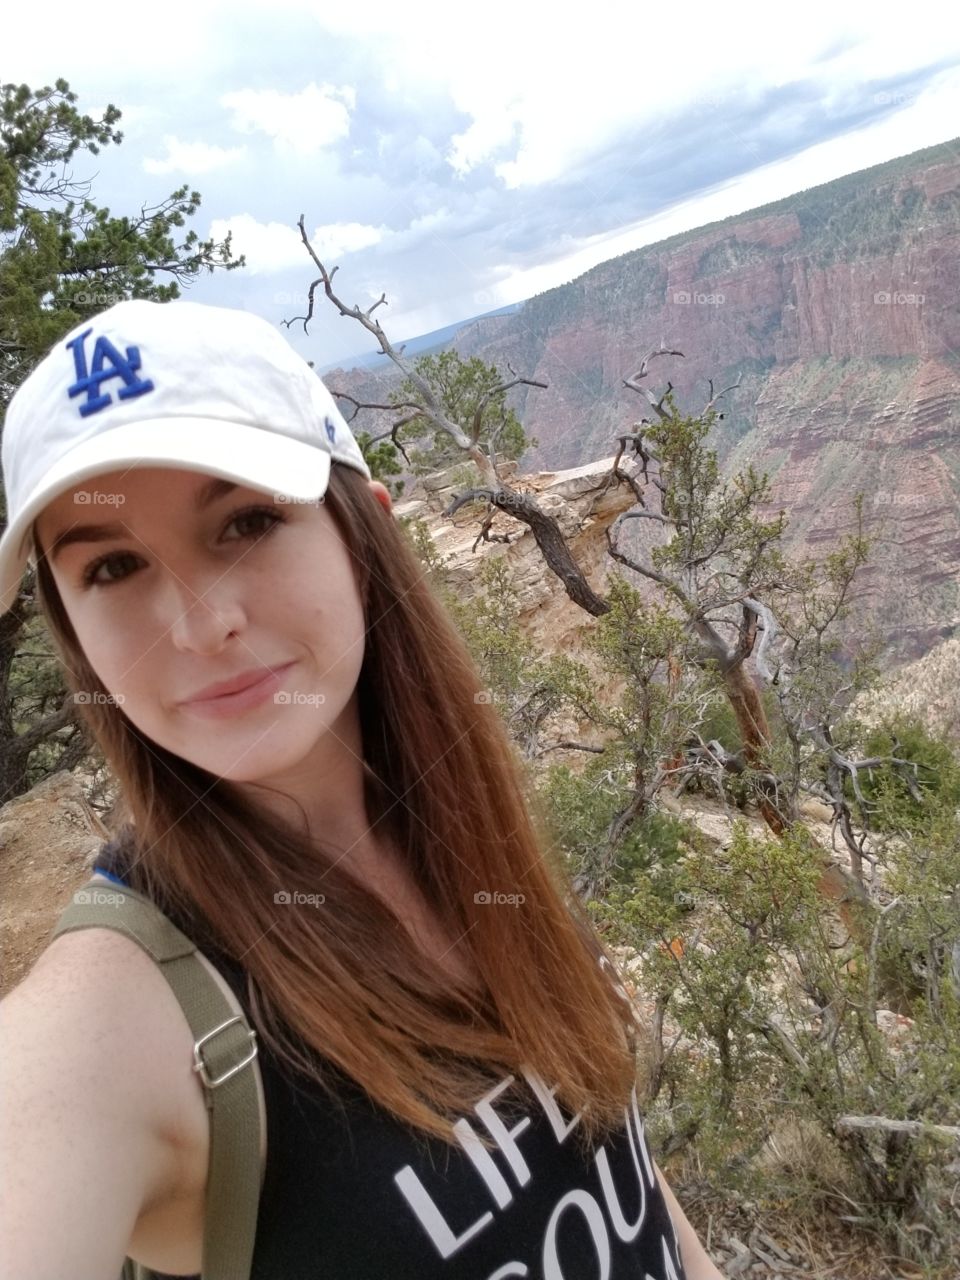 Me on a cliff at the Grand Canyon 🌻 vacation wow